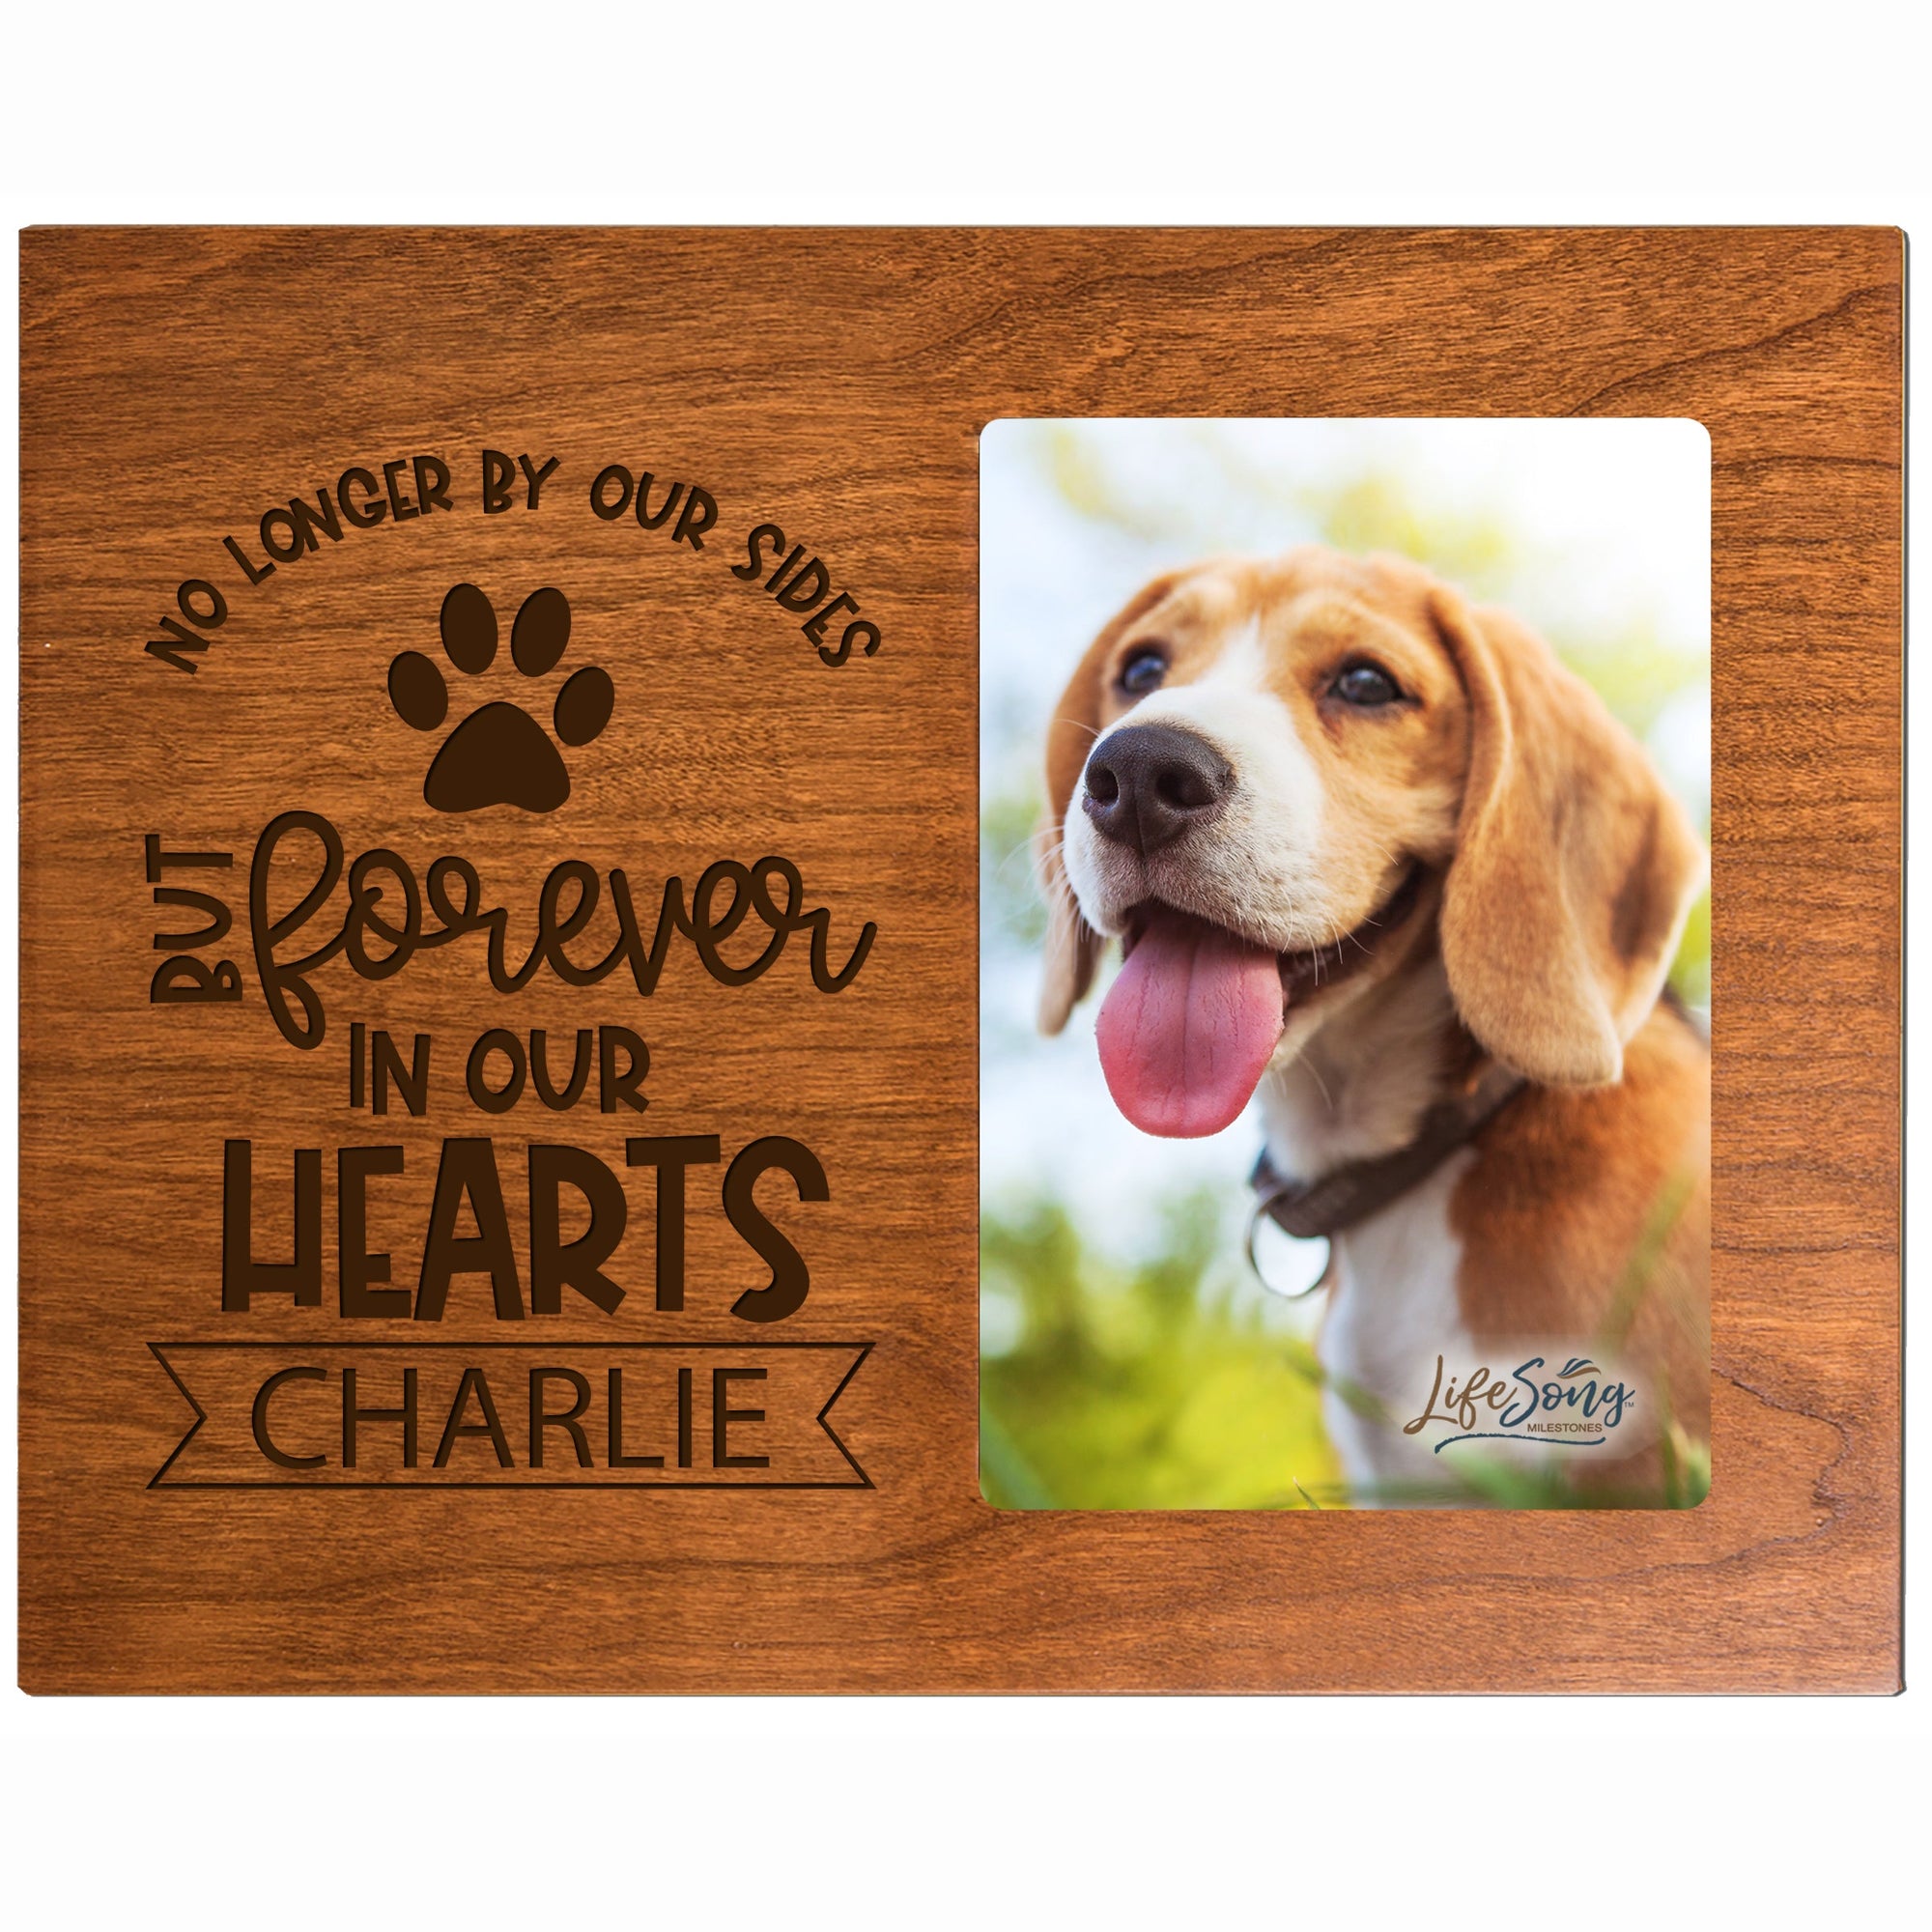 8x10 Cherry Pet Memorial Picture Frame with the phrase "No Longer By Our Sides But Forever In Our Hearts"